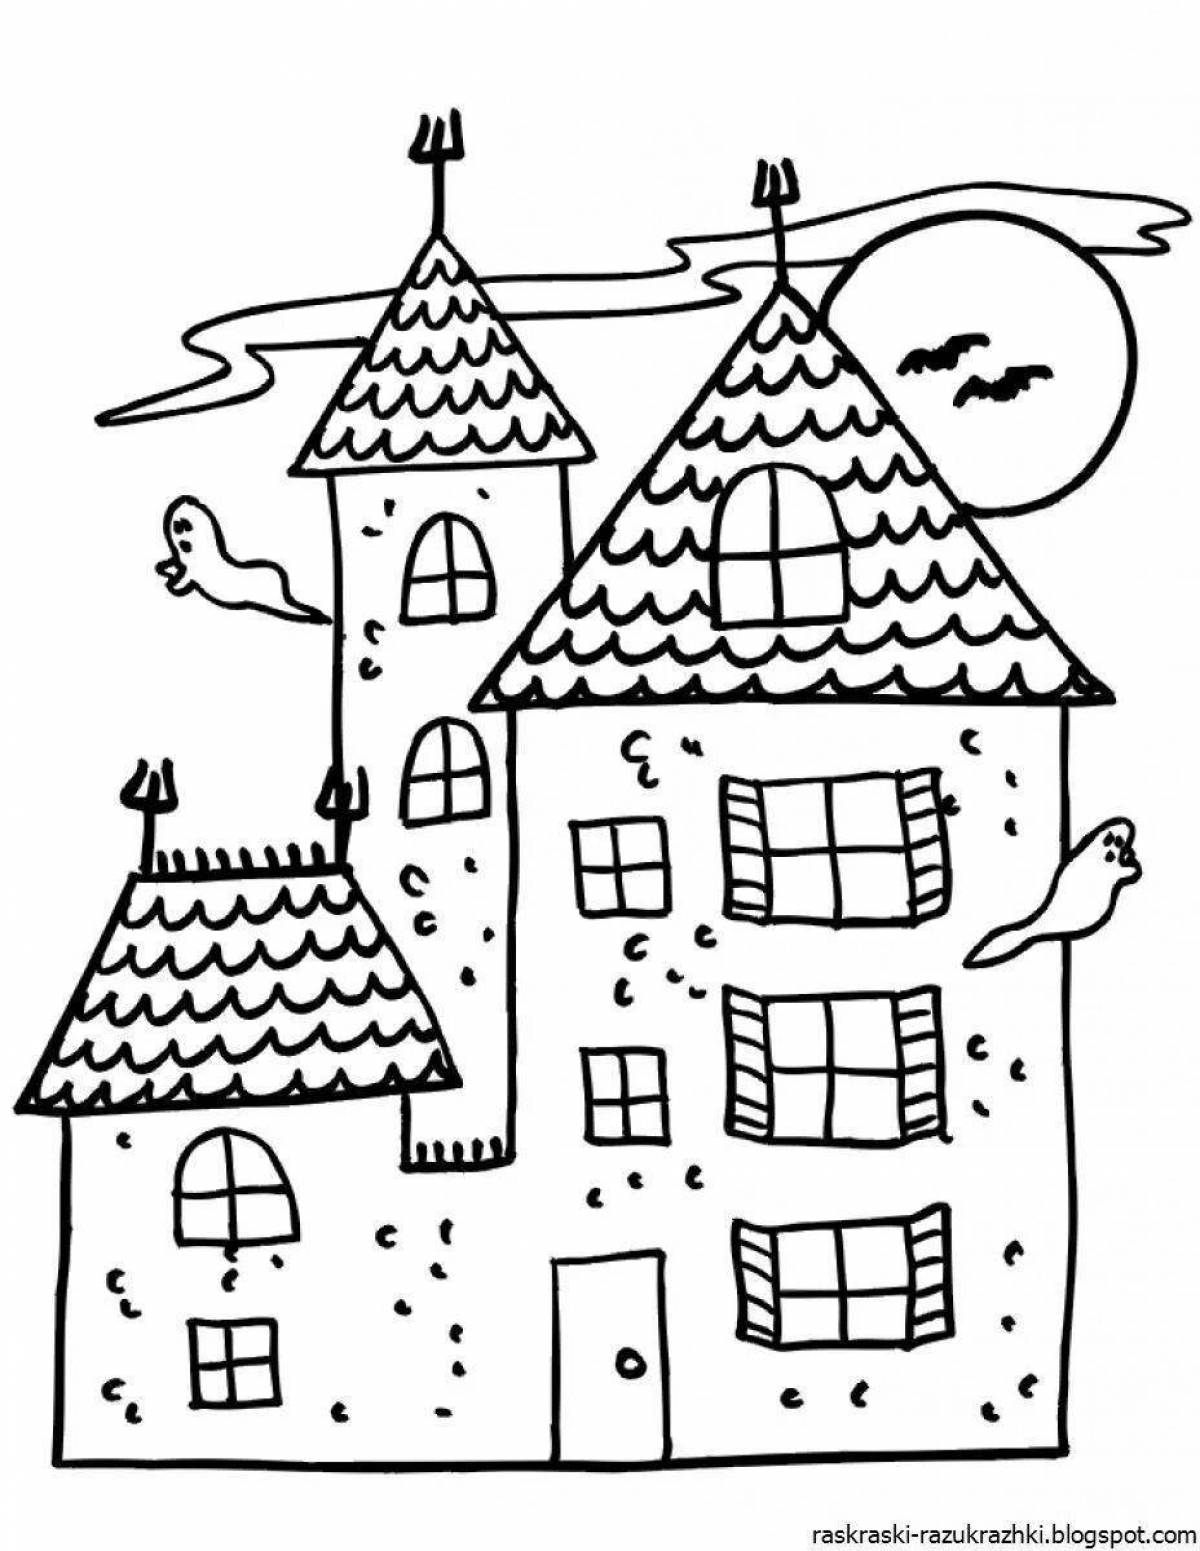 Crazy Colored House coloring pages for kids